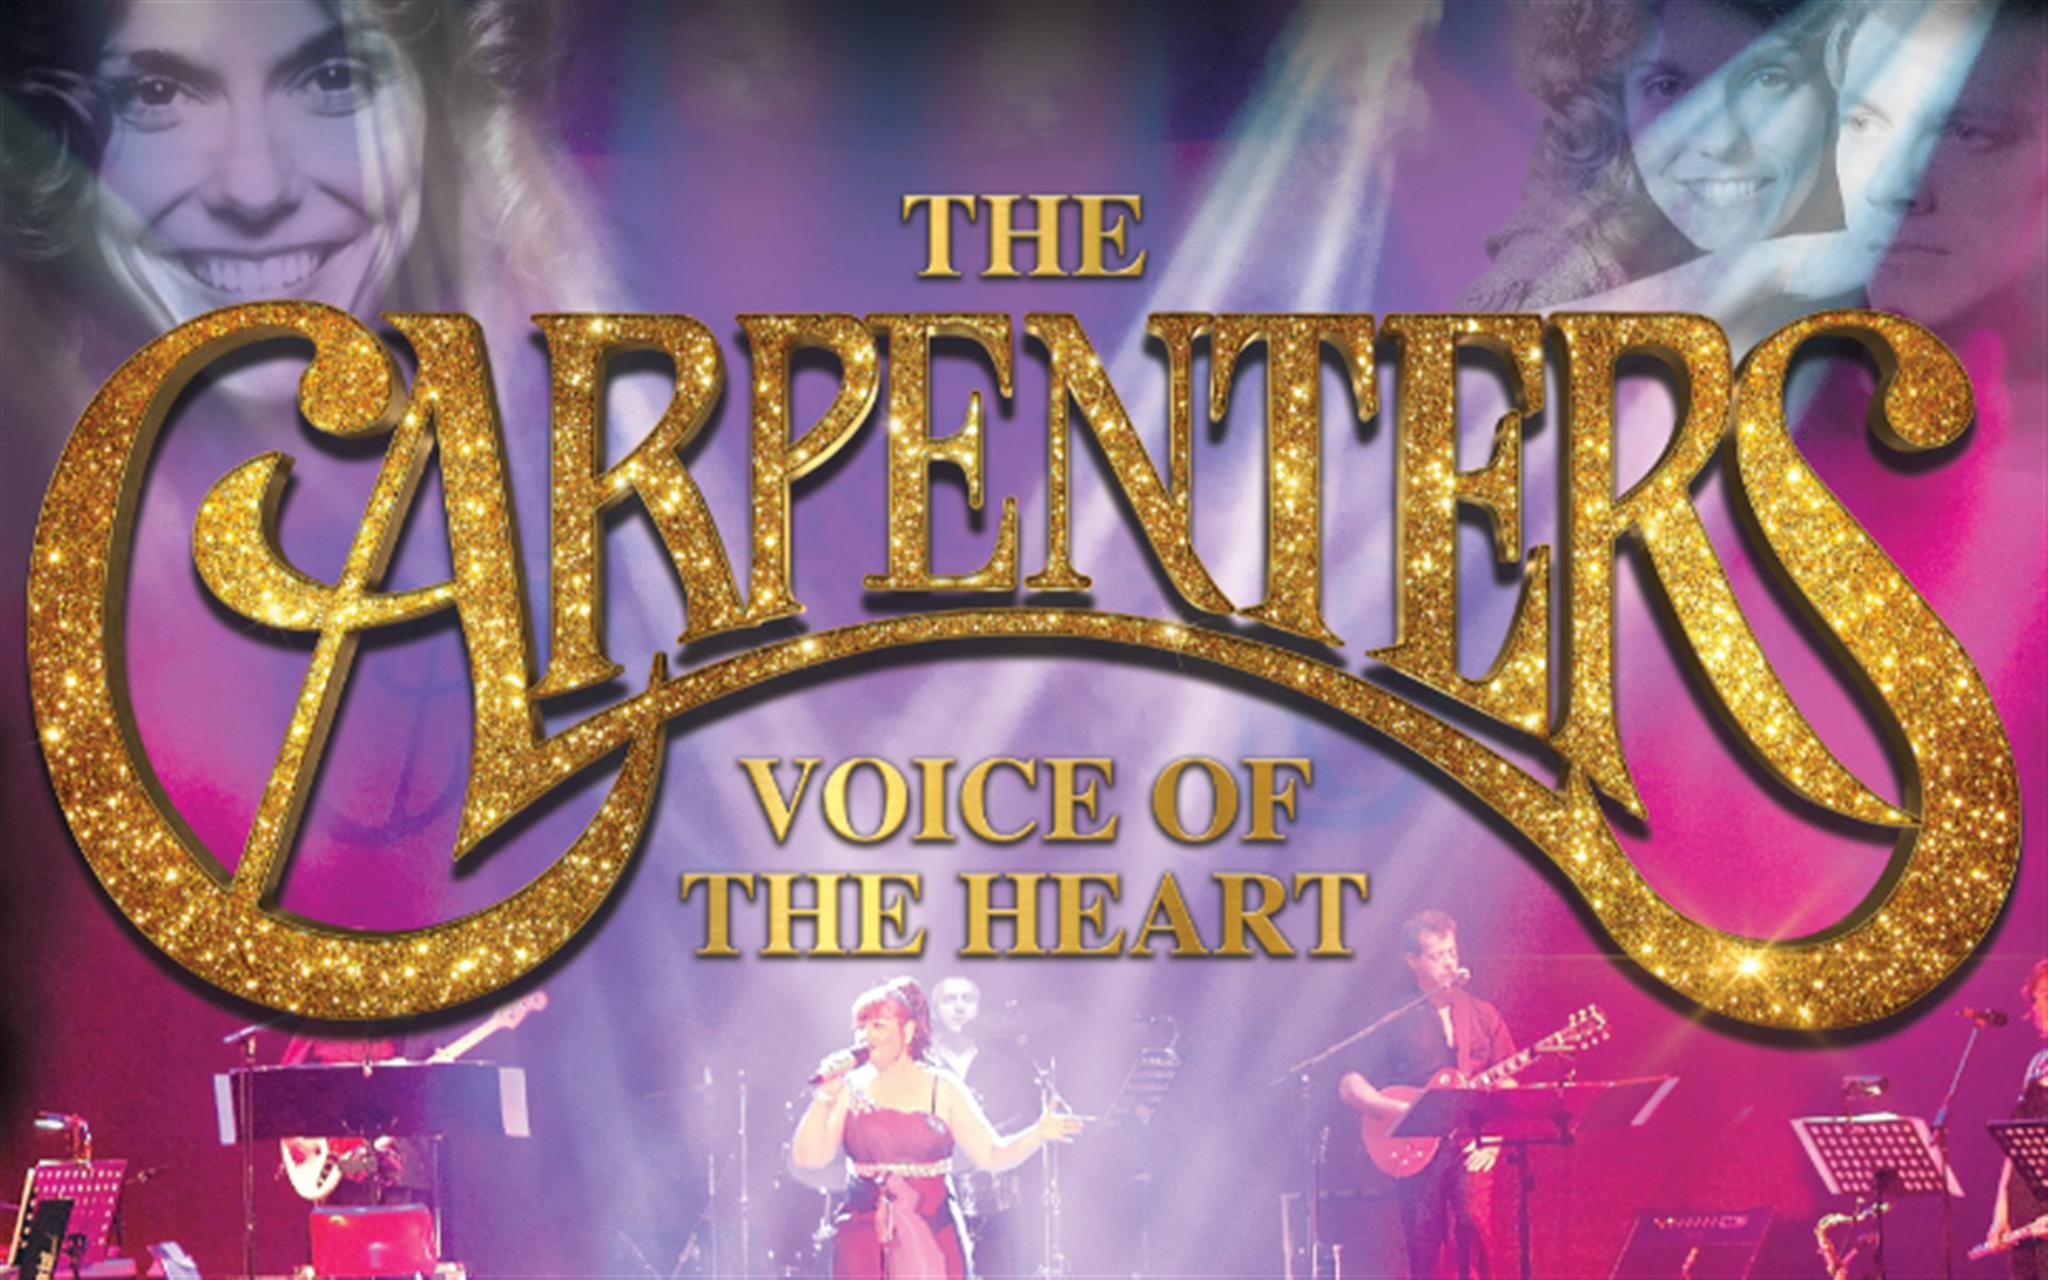 The Carpenters: Voice of the Heart image